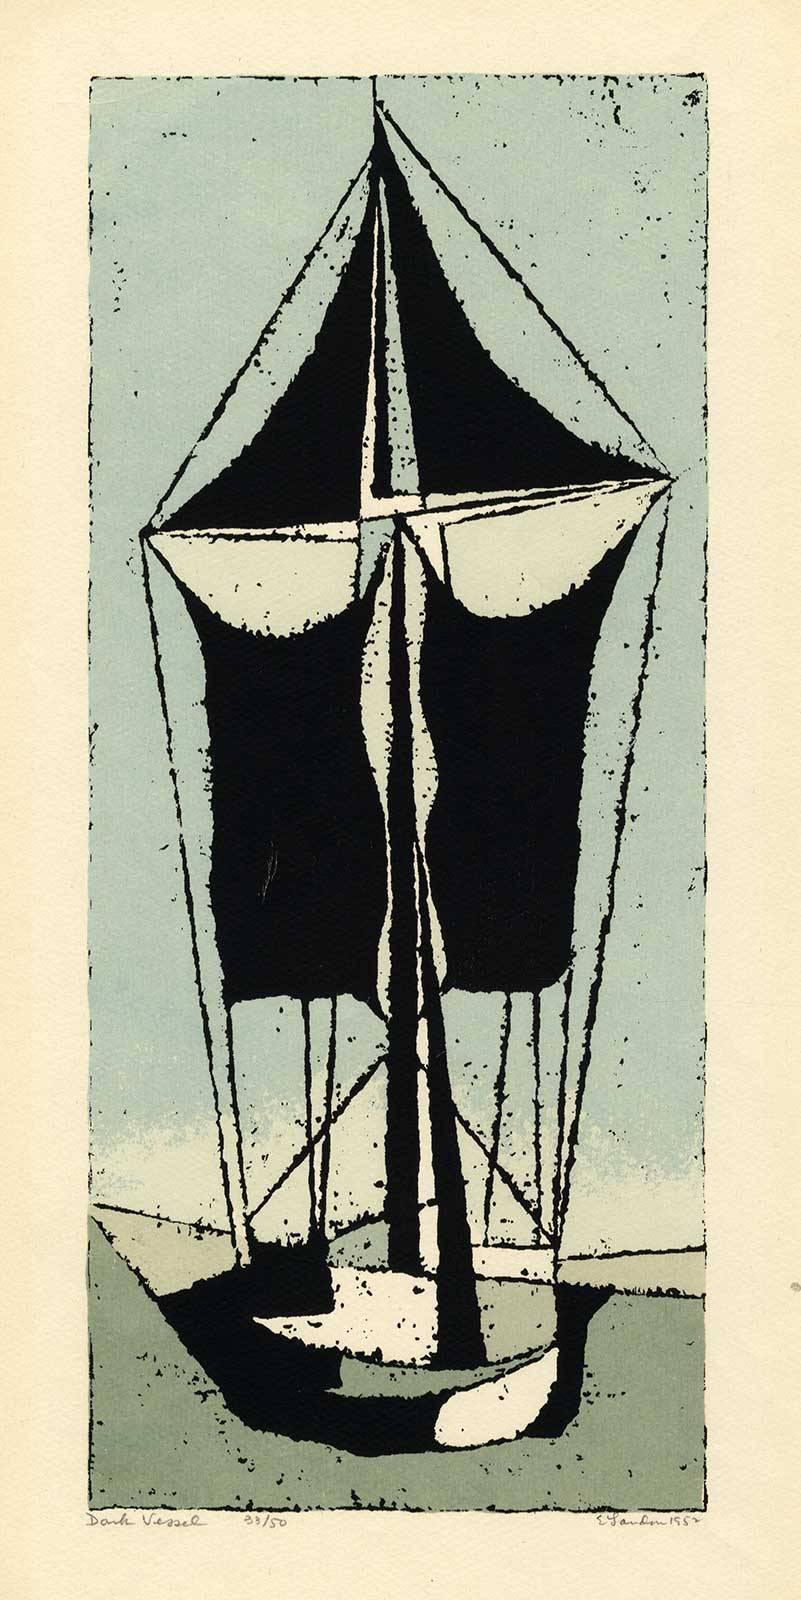 Edward Landon Print - Dark Vessel (one of the very early examples of screenprinting as a fine art)